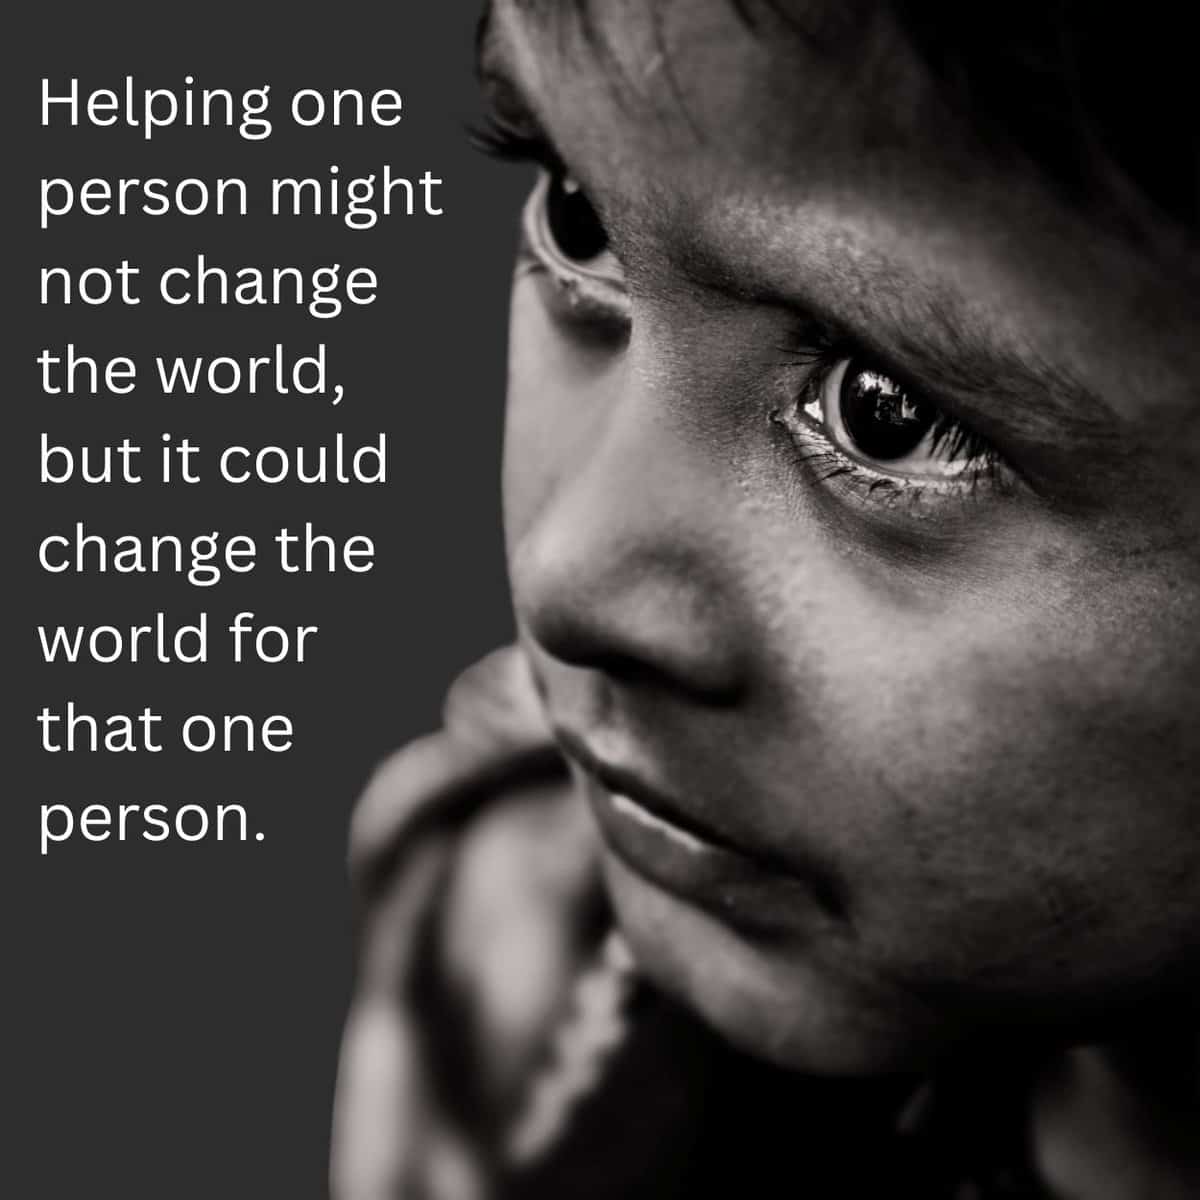 Helping One Person Might Not Change The World, But It Could Change The World For That One Person.